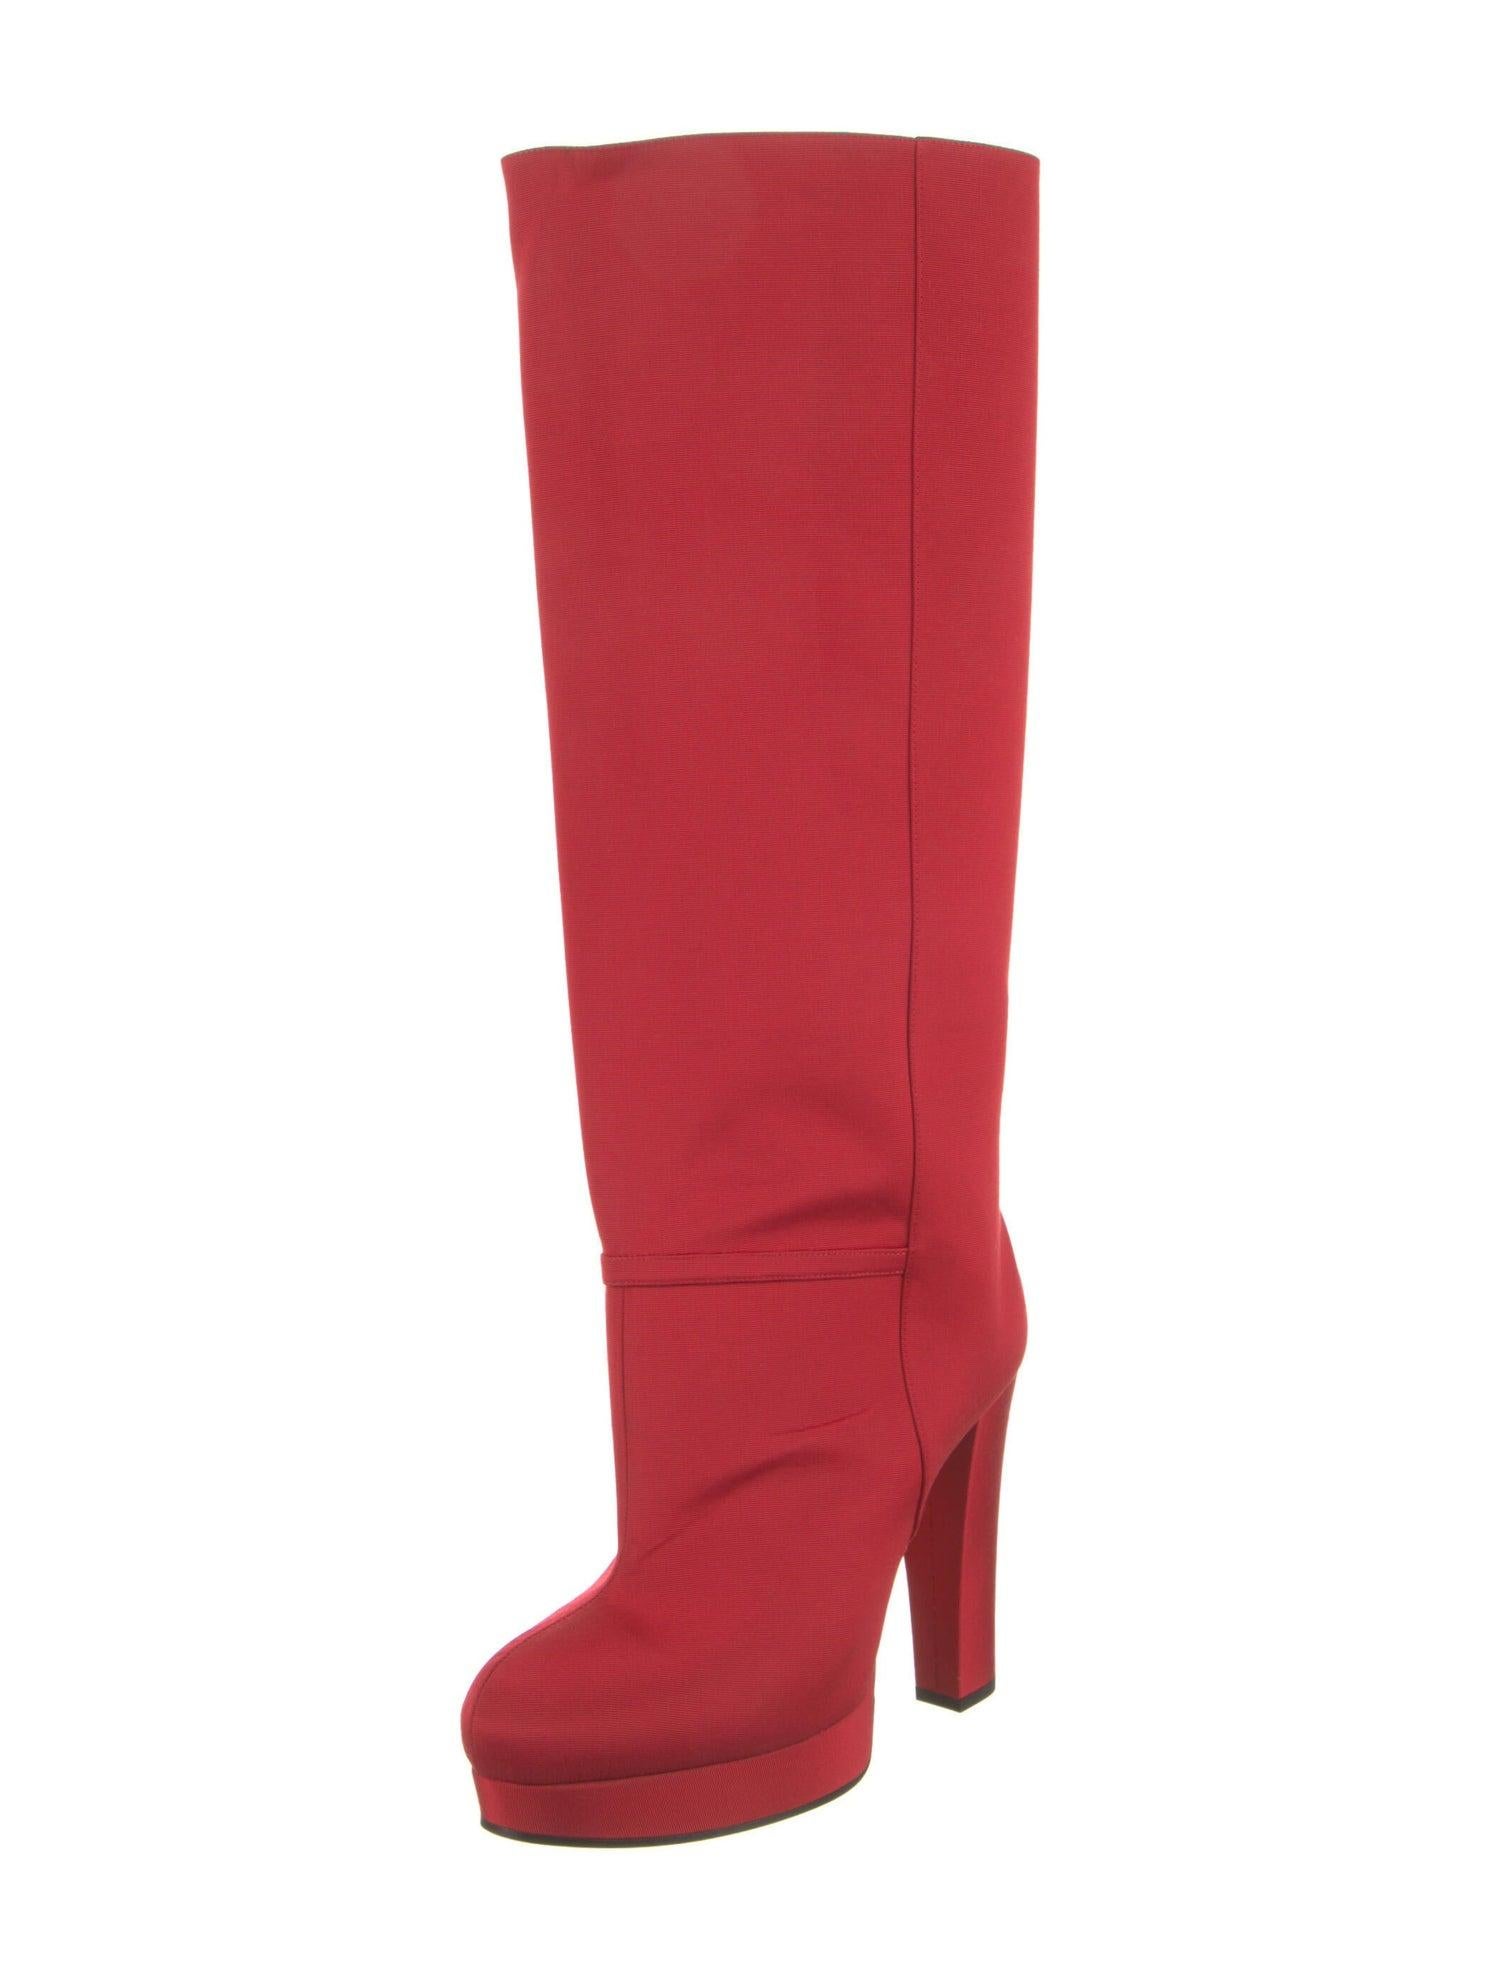 New With Box Gucci Fall 2019 Alessandro Michele Red Boots Sz 38.5 For Sale 11